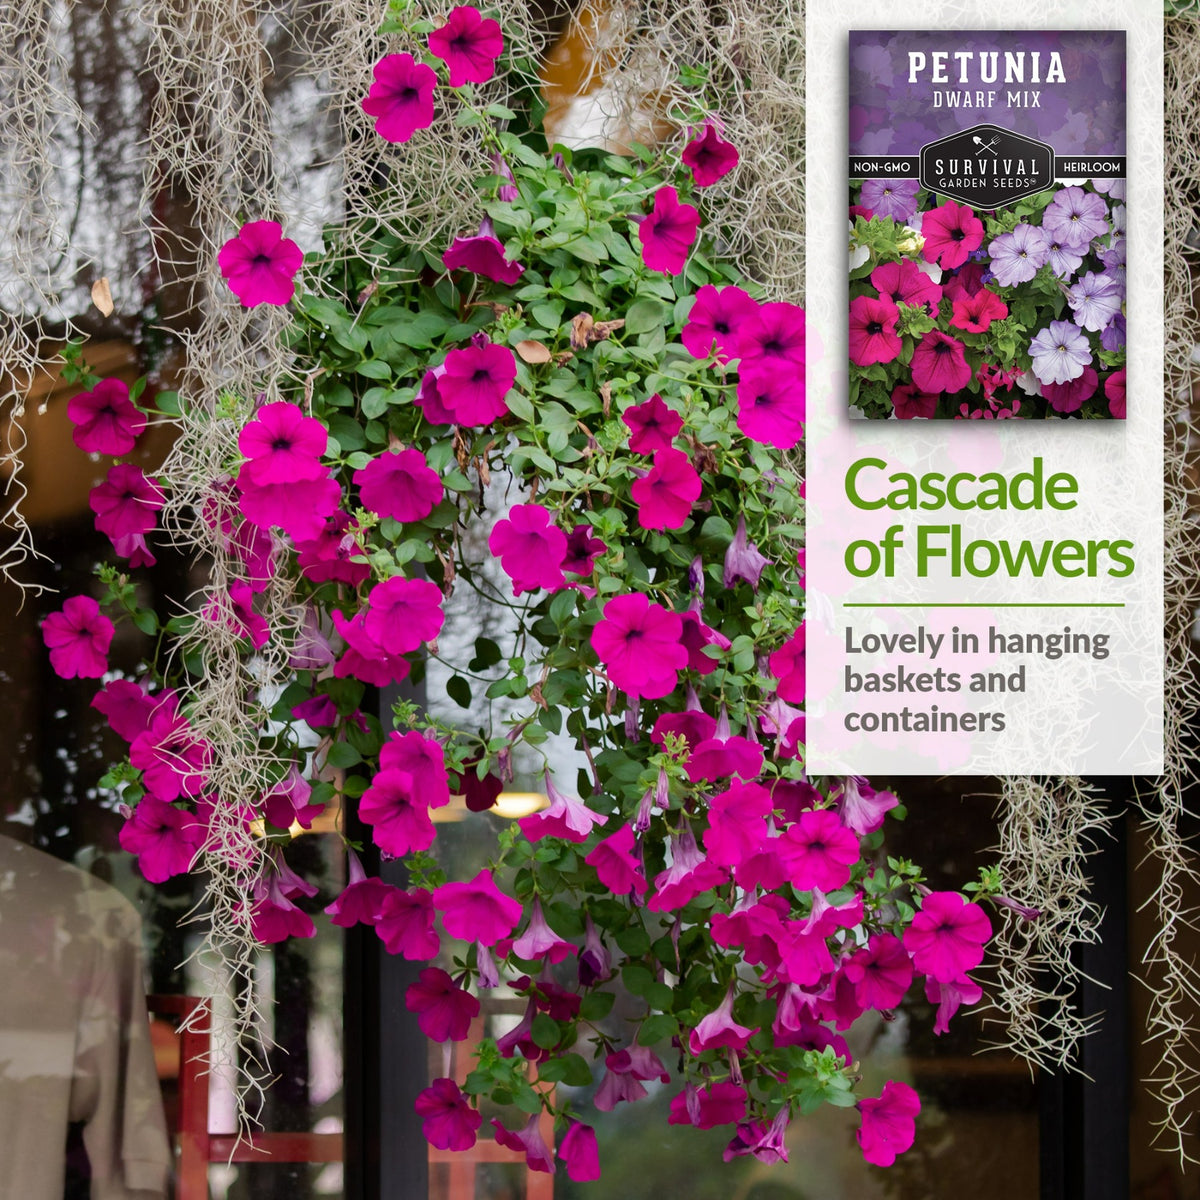 Dwarf petunias are lovely in hanging baskets and containers